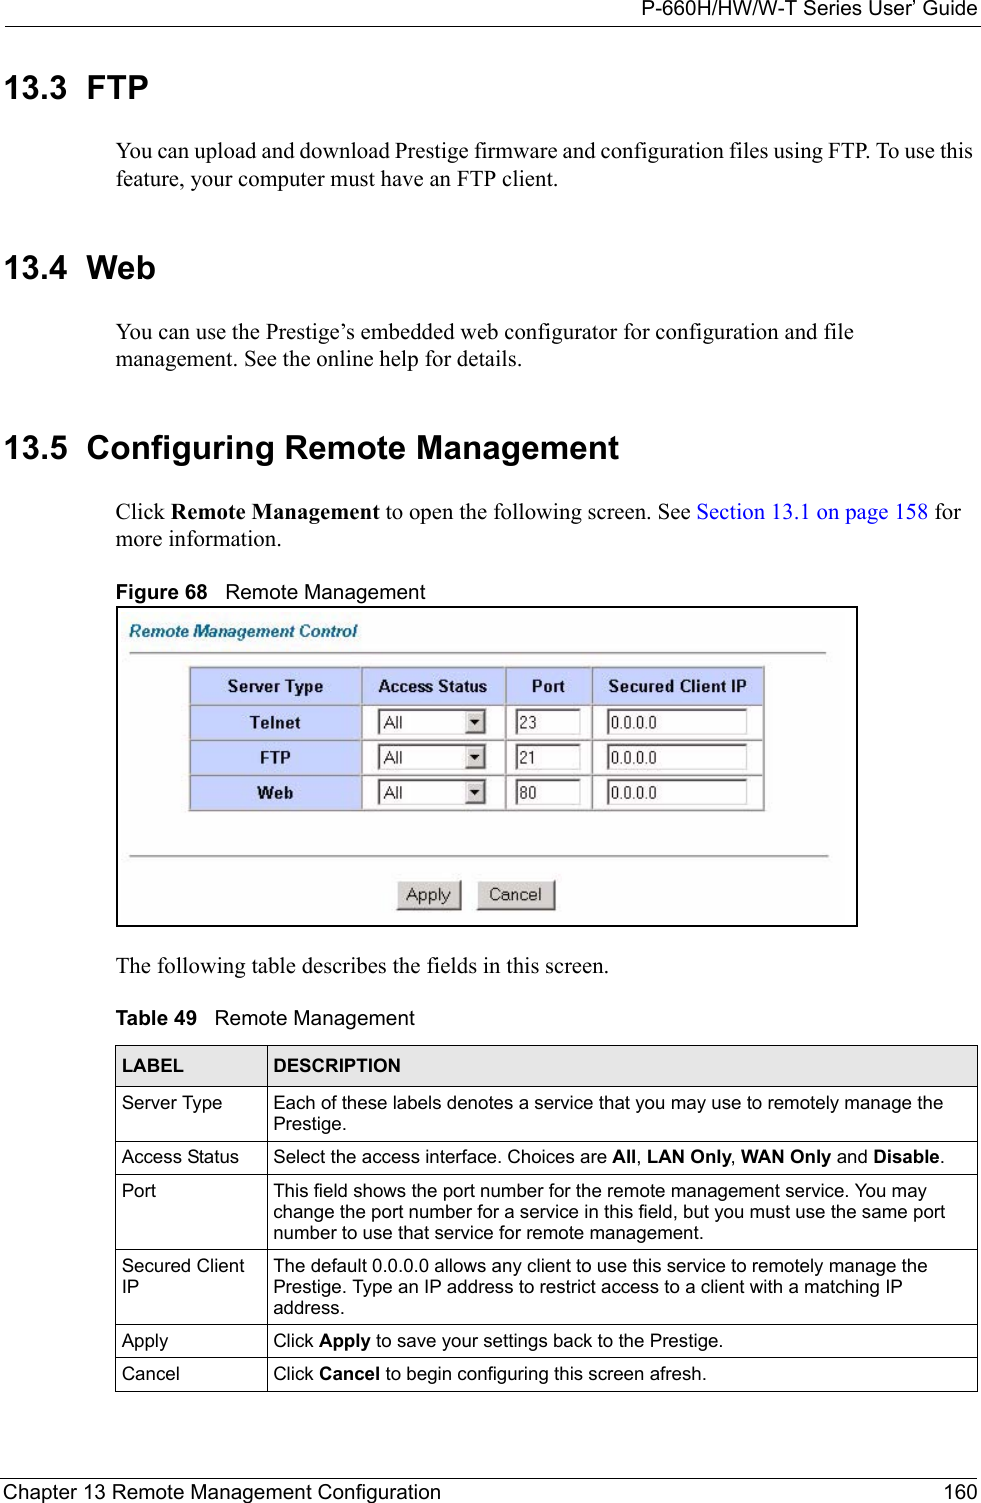 P-660H/HW/W-T Series User’ GuideChapter 13 Remote Management Configuration 16013.3  FTPYou can upload and download Prestige firmware and configuration files using FTP. To use this feature, your computer must have an FTP client.13.4  WebYou can use the Prestige’s embedded web configurator for configuration and file management. See the online help for details.13.5  Configuring Remote Management Click Remote Management to open the following screen. See Section 13.1 on page 158 for more information. Figure 68   Remote ManagementThe following table describes the fields in this screen.Table 49   Remote ManagementLABEL DESCRIPTIONServer Type  Each of these labels denotes a service that you may use to remotely manage the Prestige.Access Status Select the access interface. Choices are All, LAN Only, WAN Only and Disable. Port This field shows the port number for the remote management service. You may change the port number for a service in this field, but you must use the same port number to use that service for remote management.Secured Client IPThe default 0.0.0.0 allows any client to use this service to remotely manage the Prestige. Type an IP address to restrict access to a client with a matching IP address. Apply Click Apply to save your settings back to the Prestige.Cancel Click Cancel to begin configuring this screen afresh.